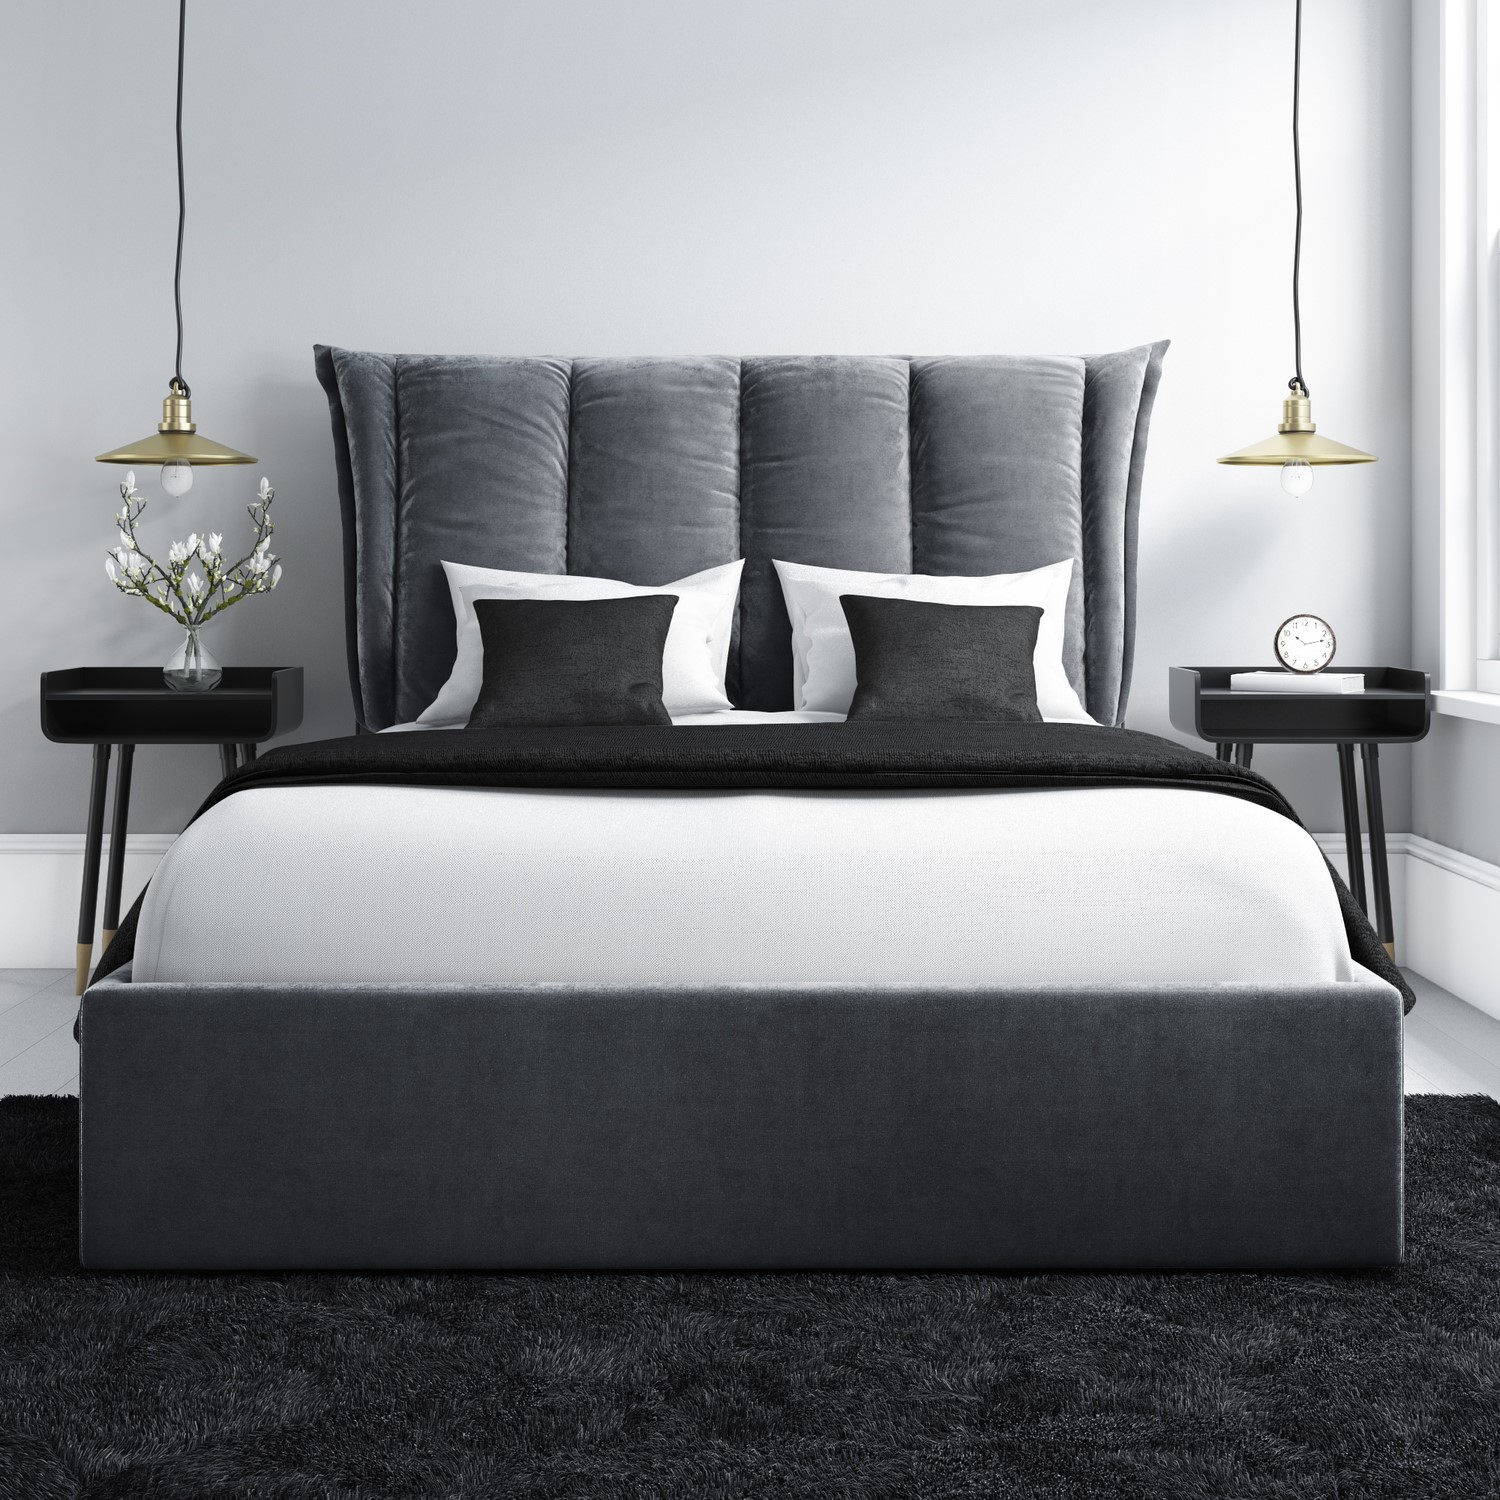 Grey Velvet King Size Ottoman Bed With, King Size Padded Headboards For Beds